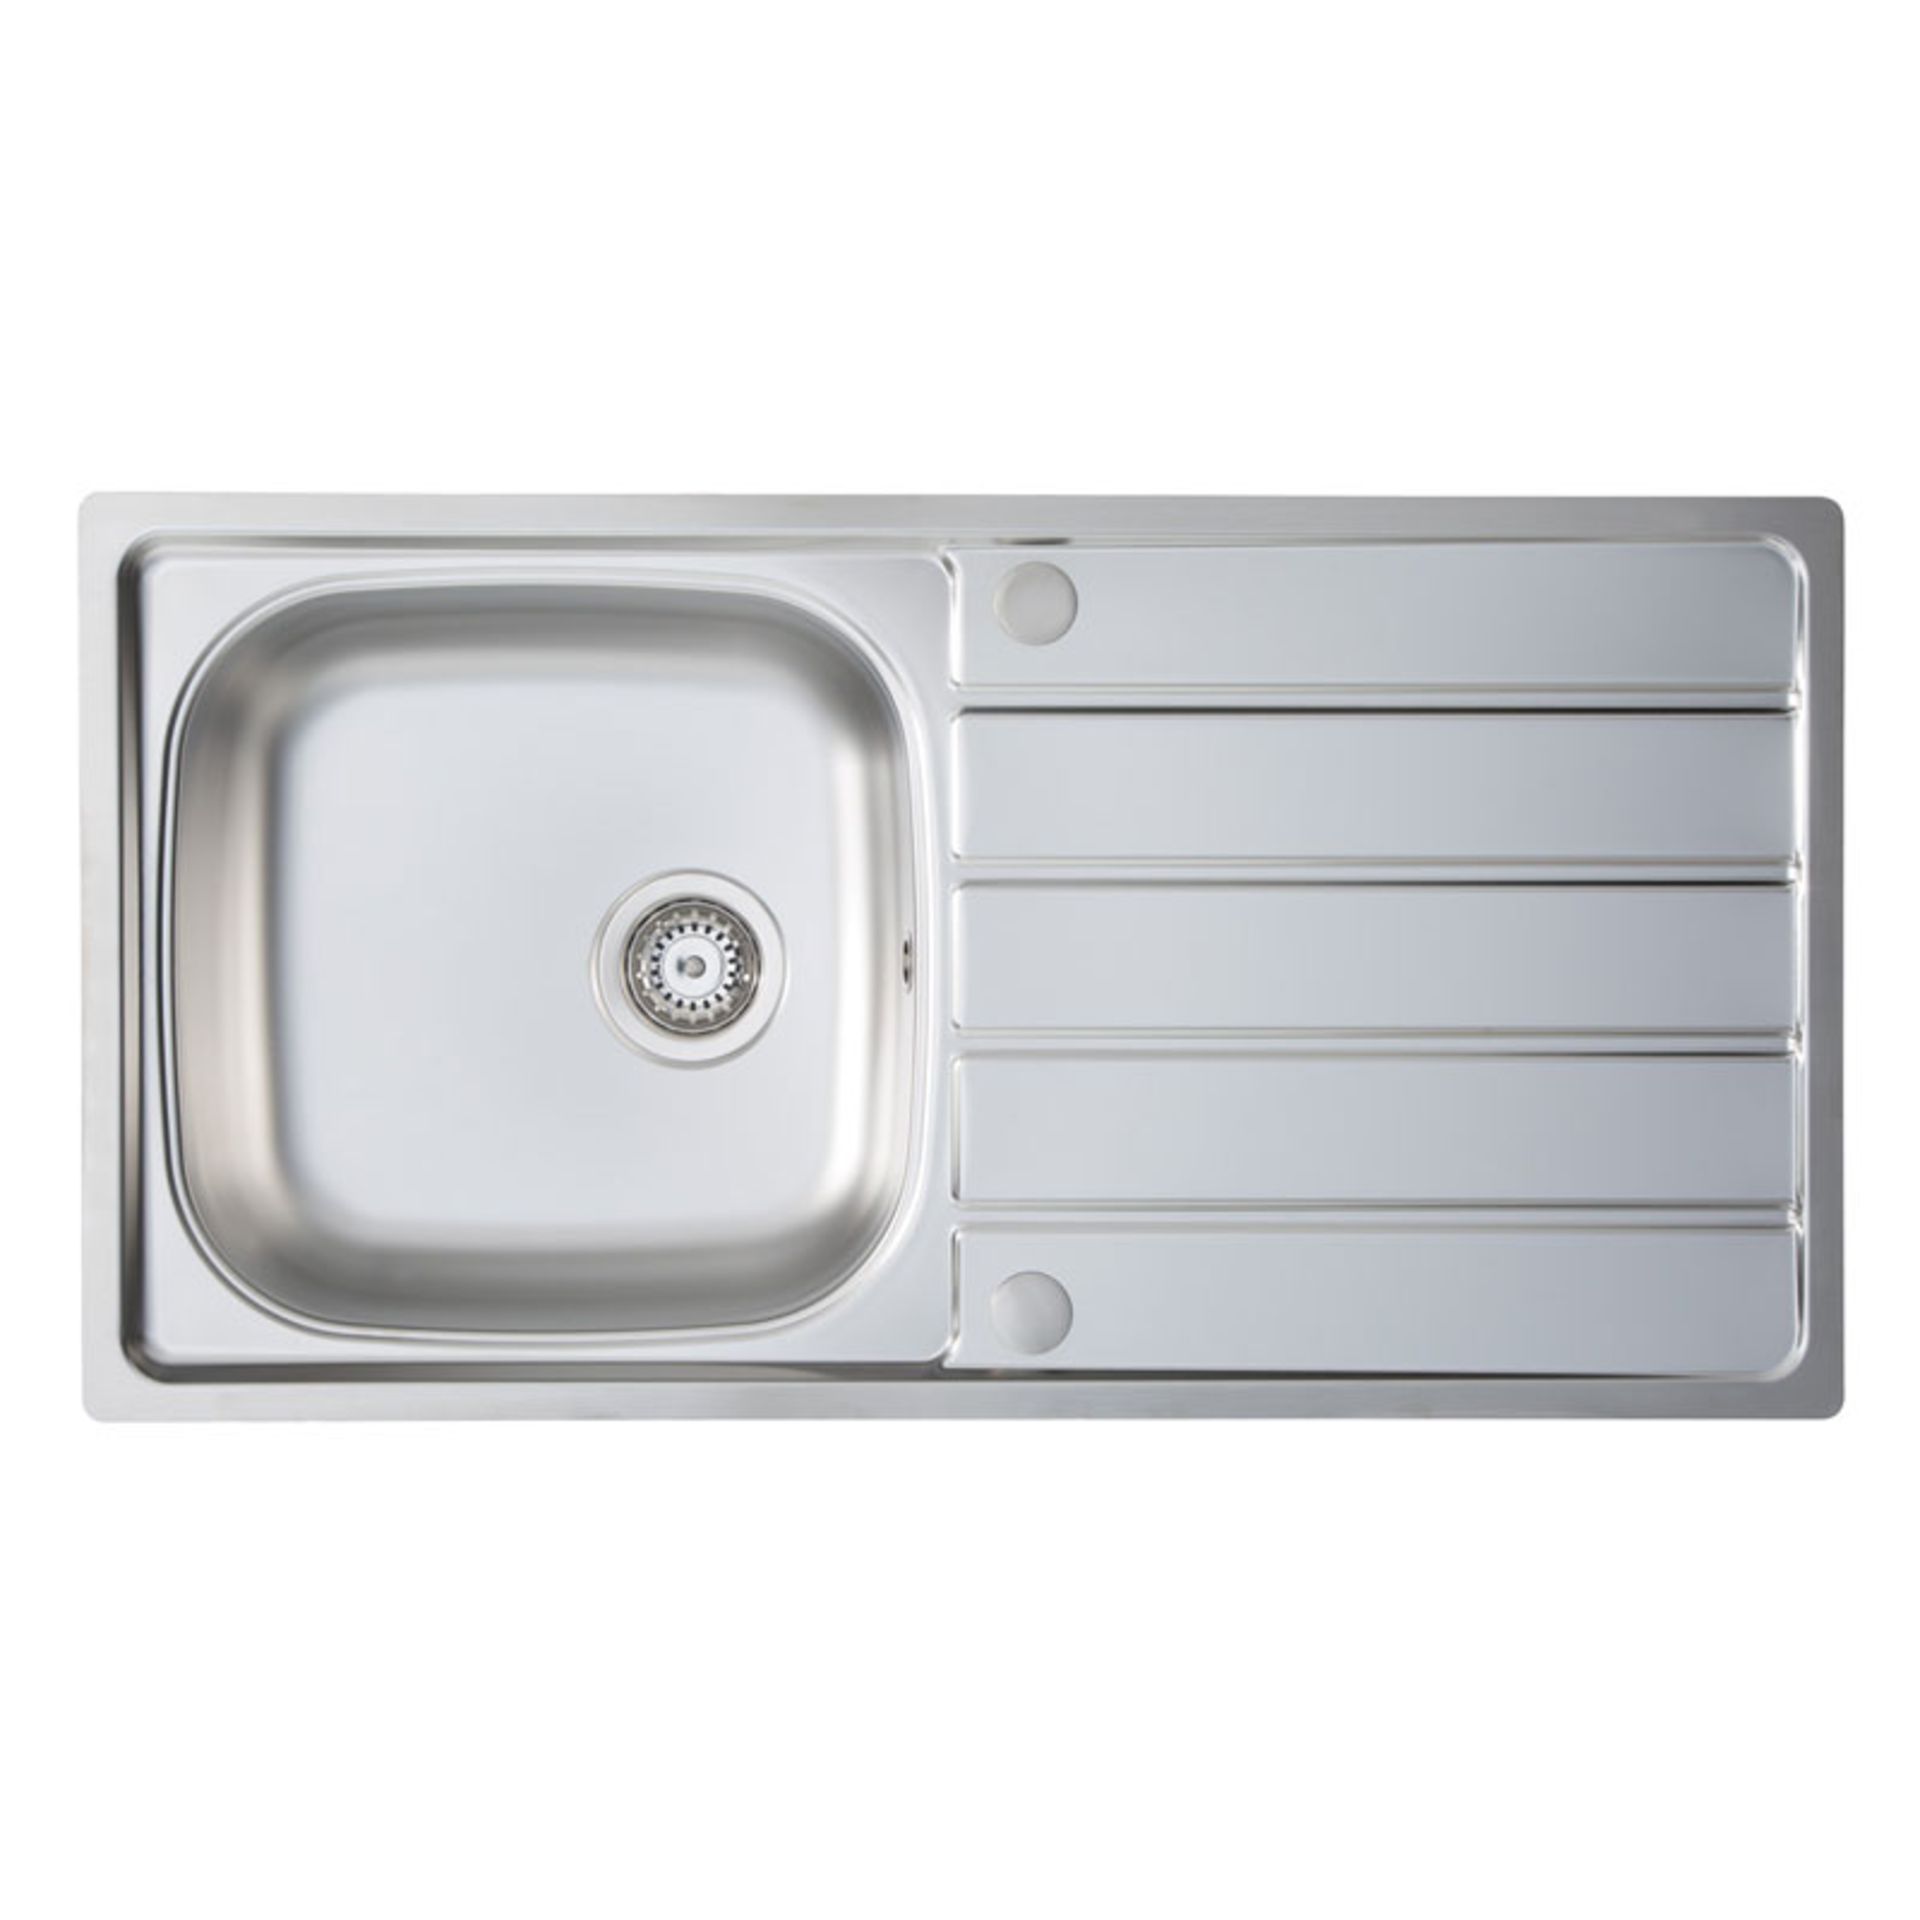 New (W182) Prima Stainless Steel Single Bowl And Drainer Inset Kitchen Sink. 965 x 500 x 170mm ...